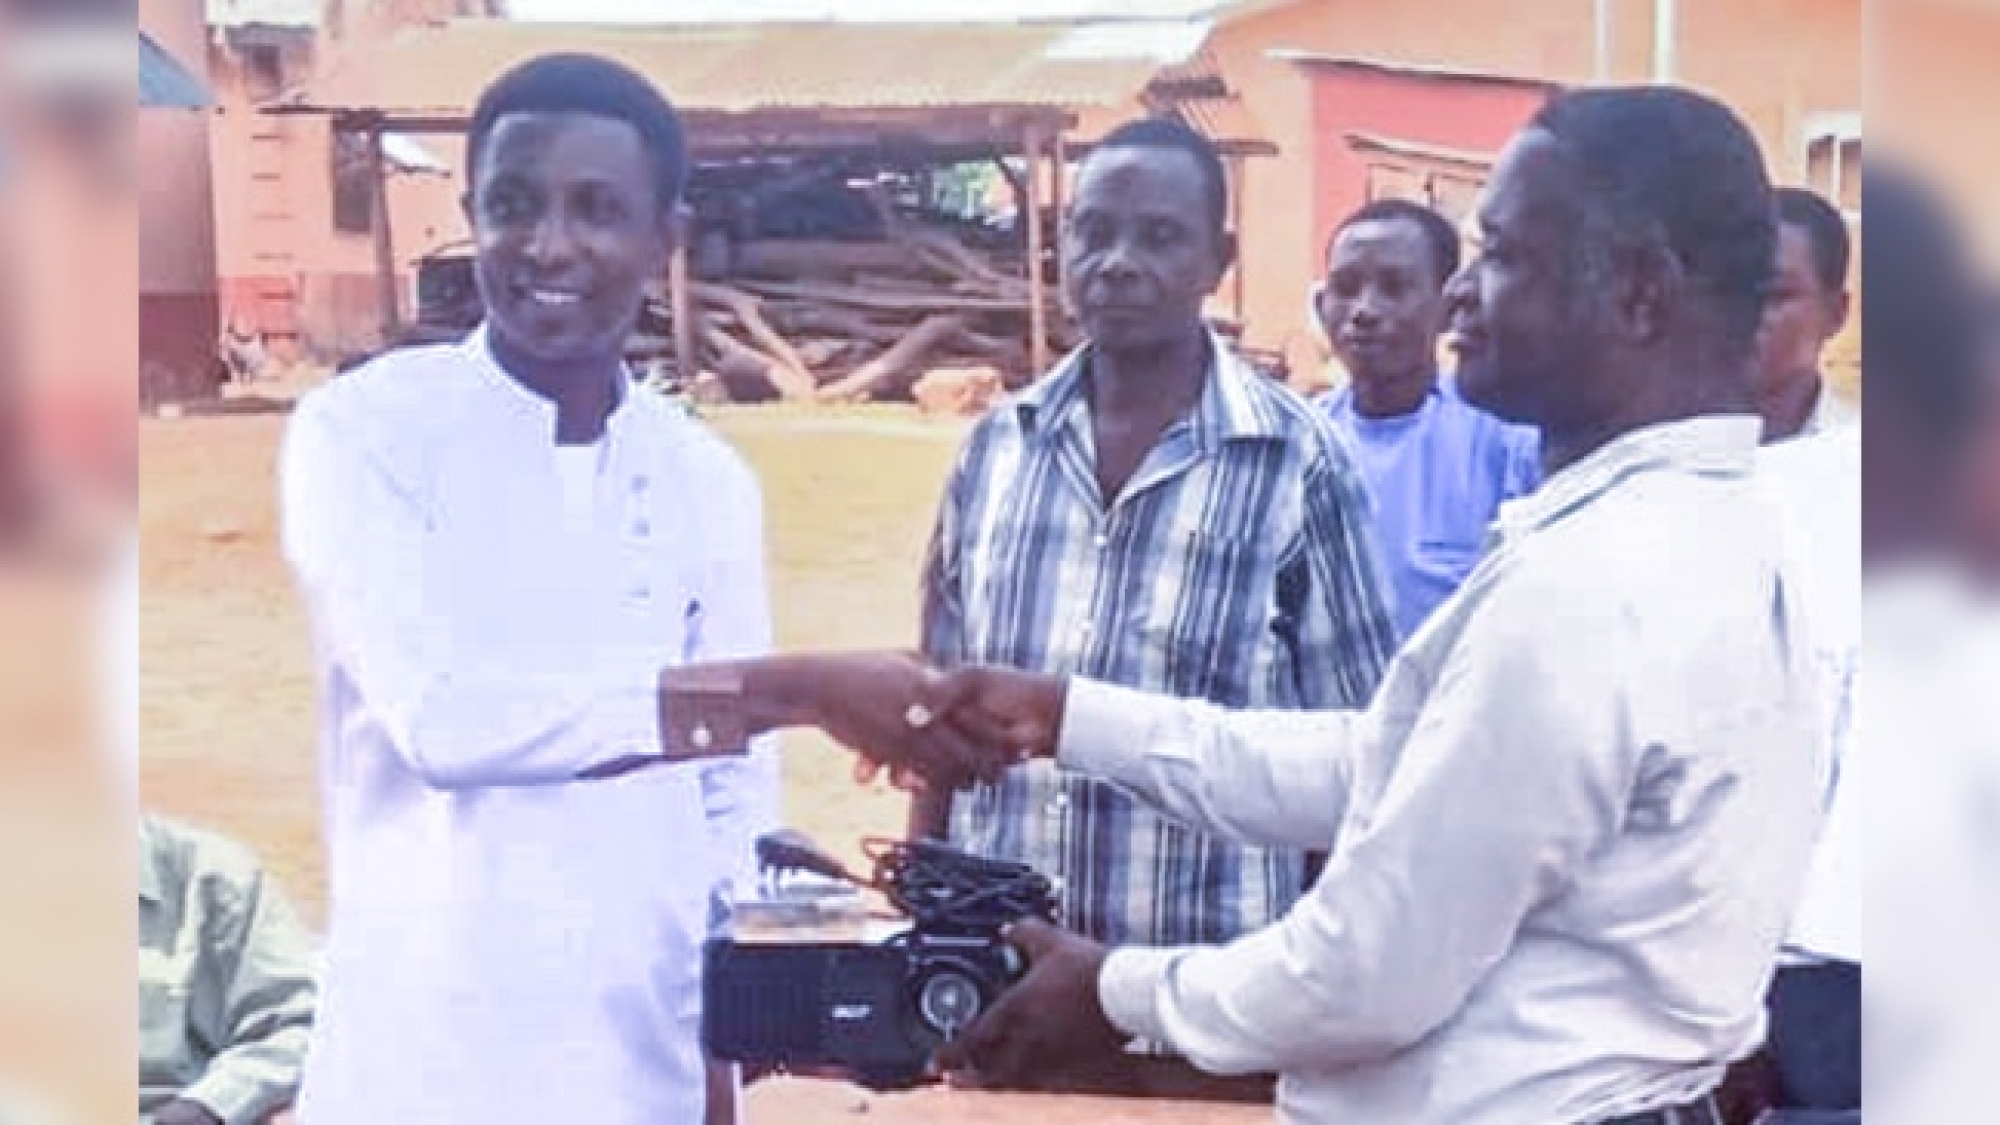 The Church Of Pentecost Donates LCD Projector To Dormabin JHS web